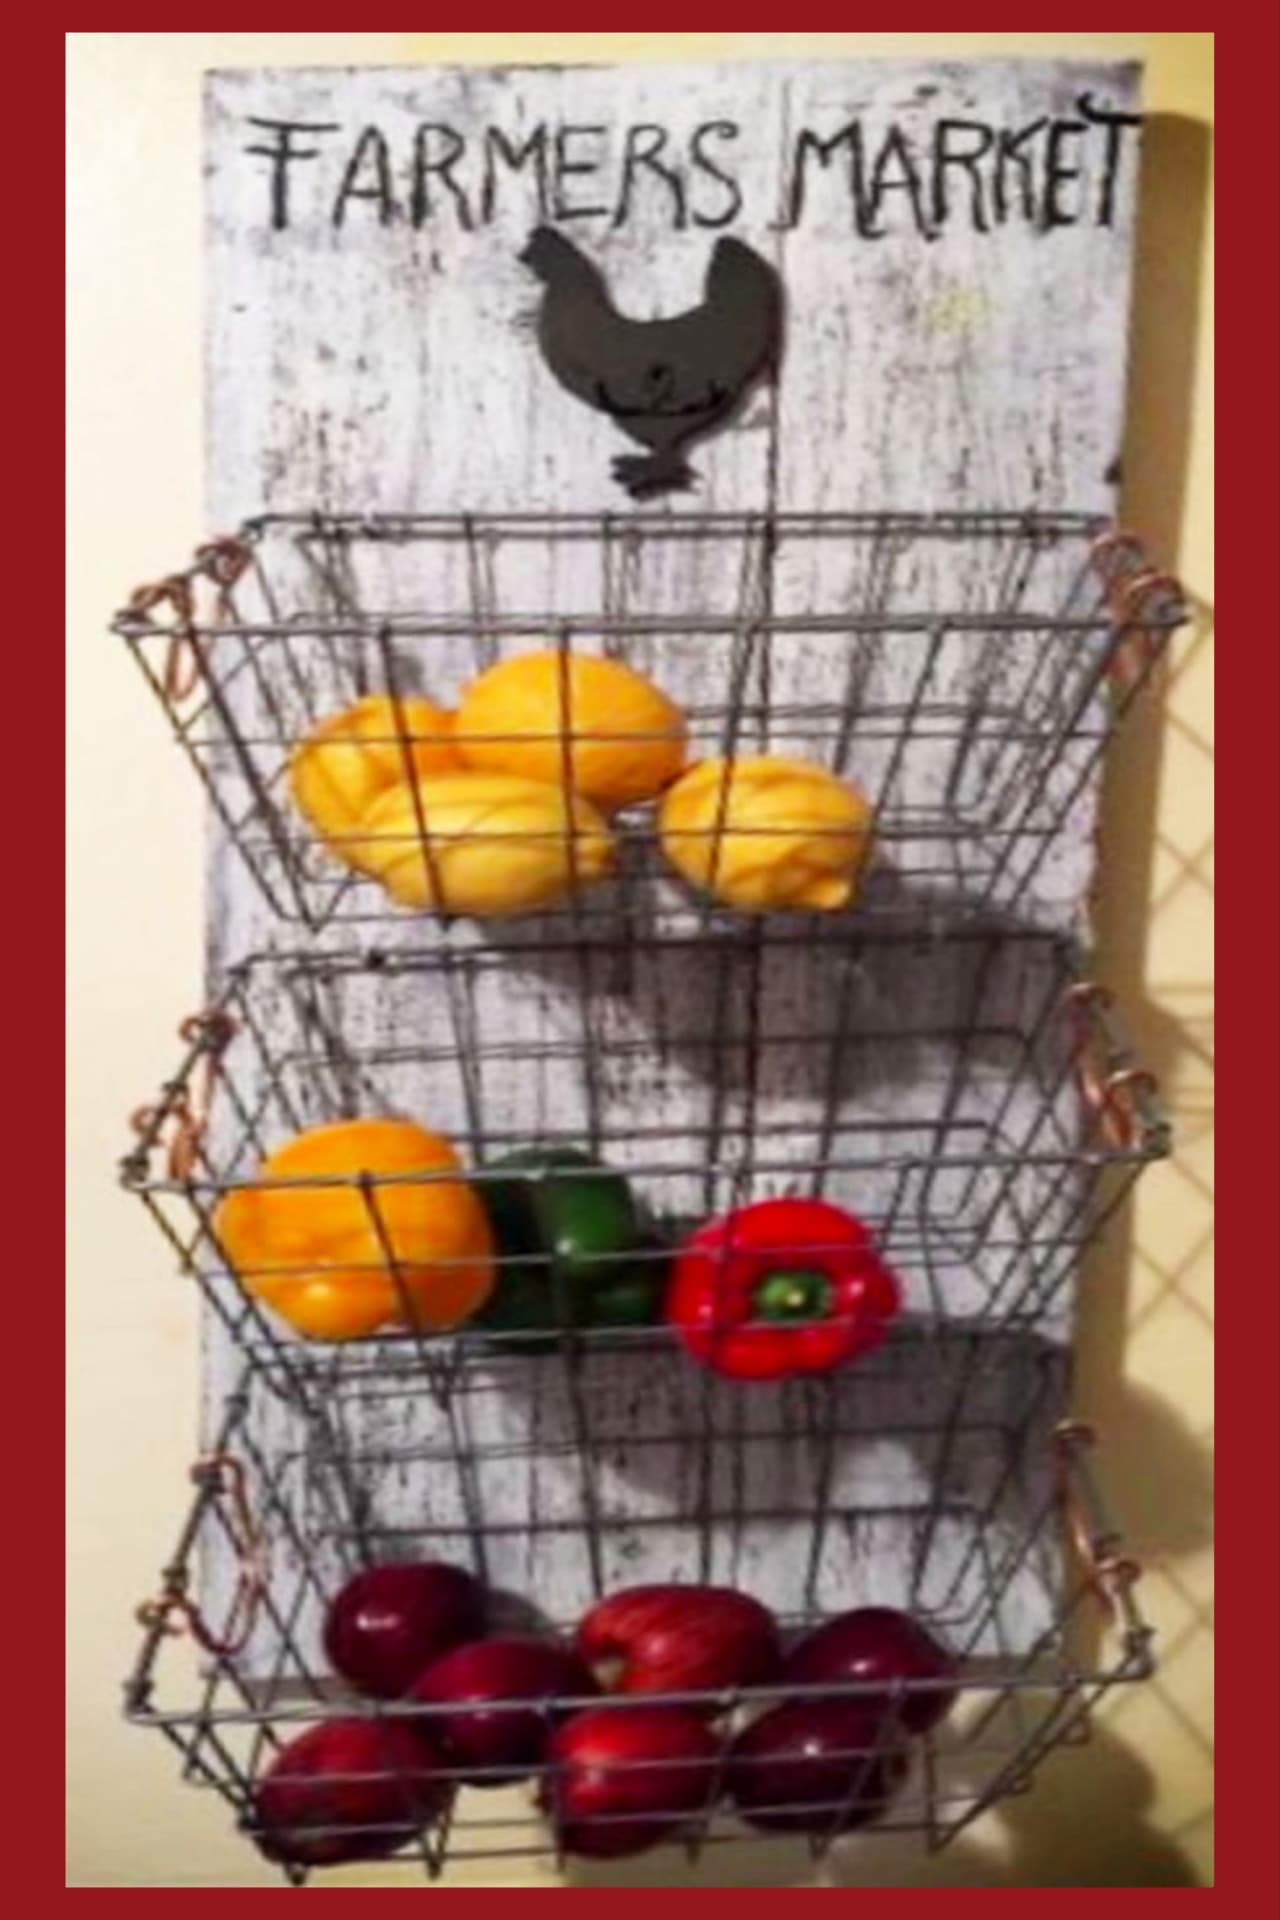 Pallet projects for your kitchen (to make or to sell) - easy DIY farmhouse kitchen hanging wall basket made from old pallet wood